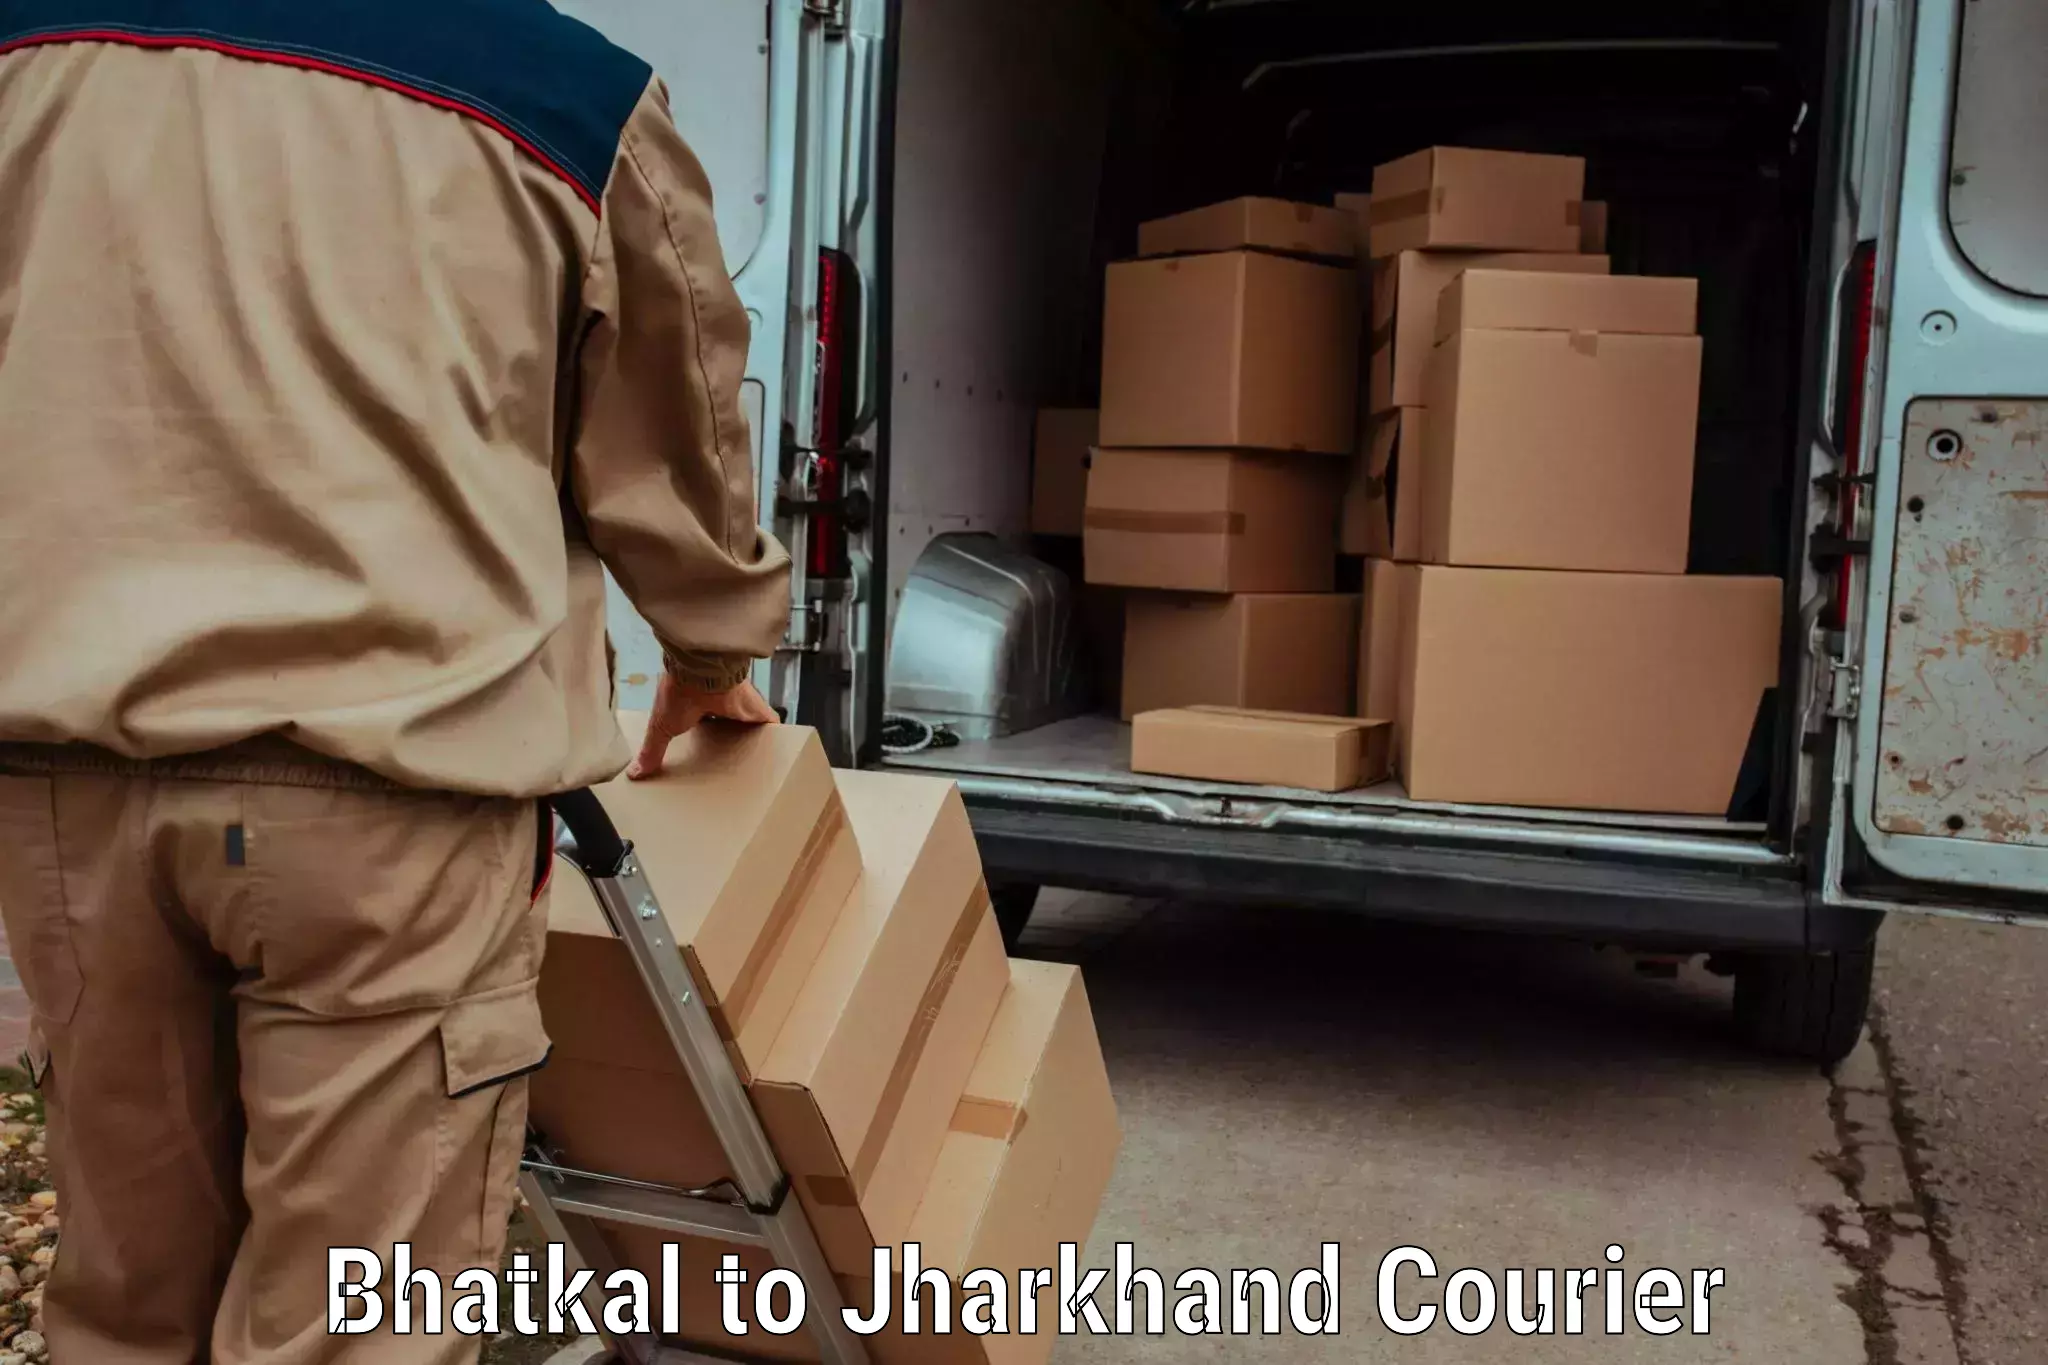 24/7 courier service Bhatkal to Koderma